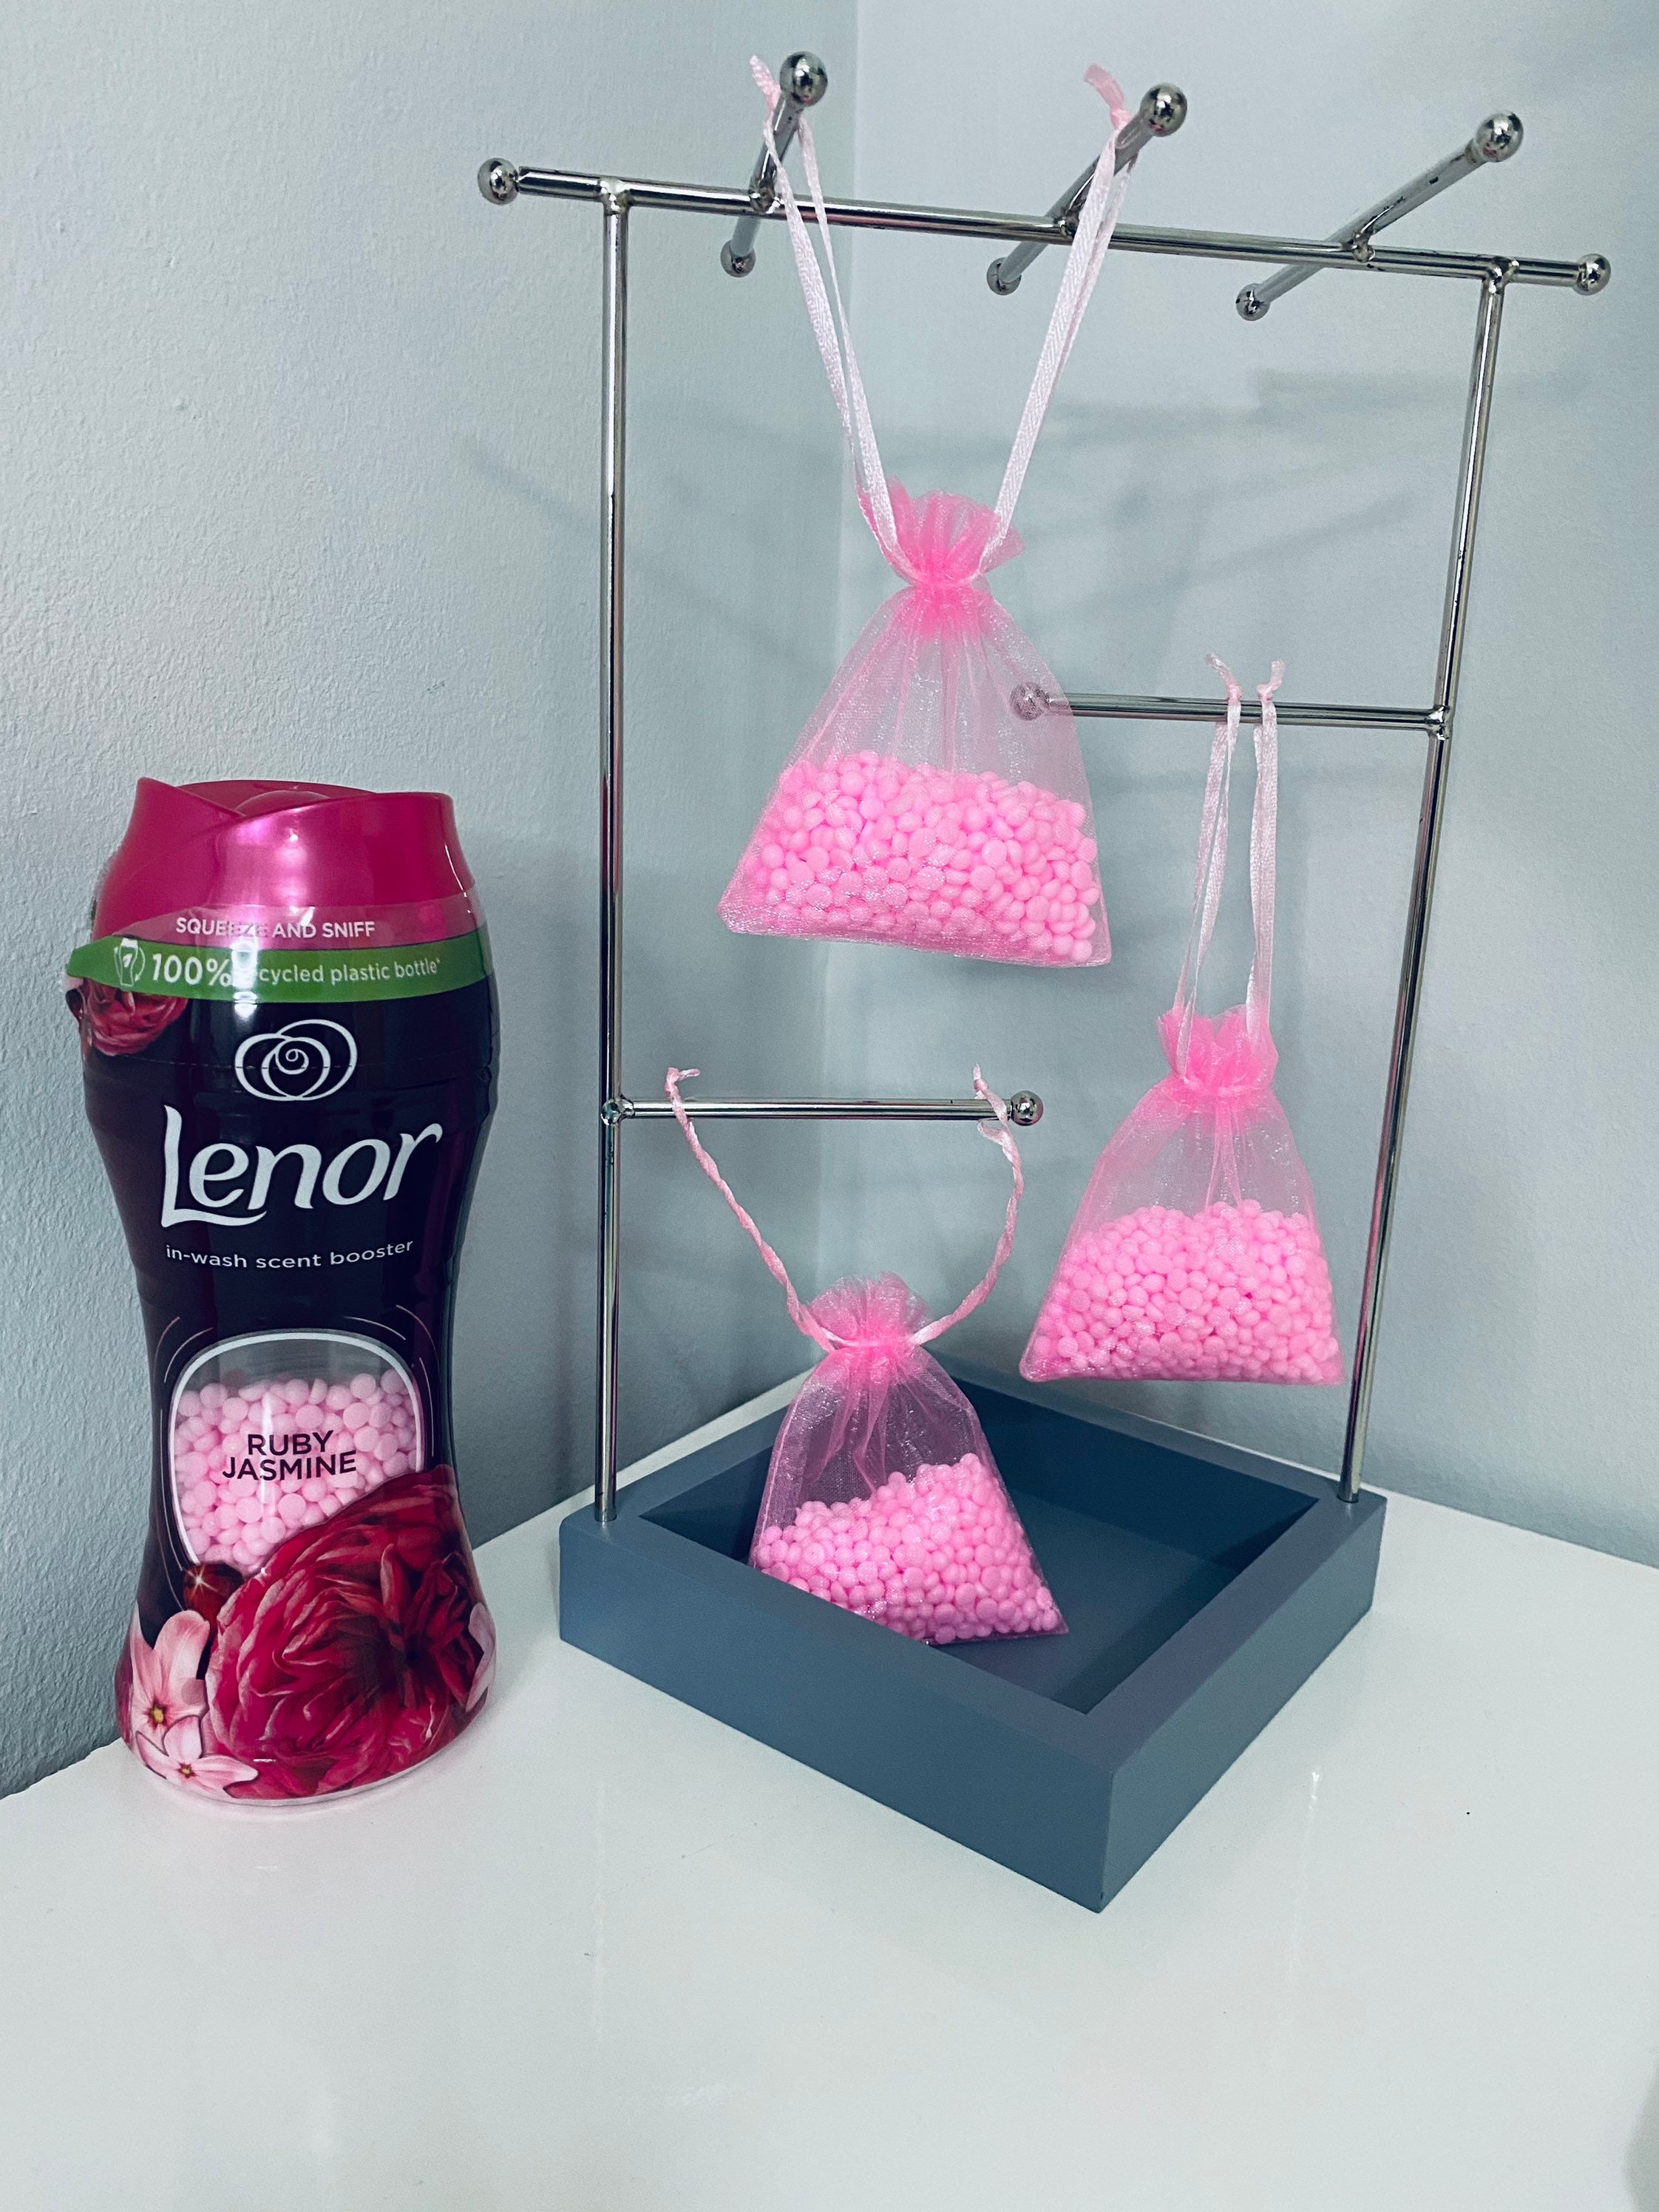 Lenor Unstoppables Pick & Mix Scent Air Freshener Bags Choose Your